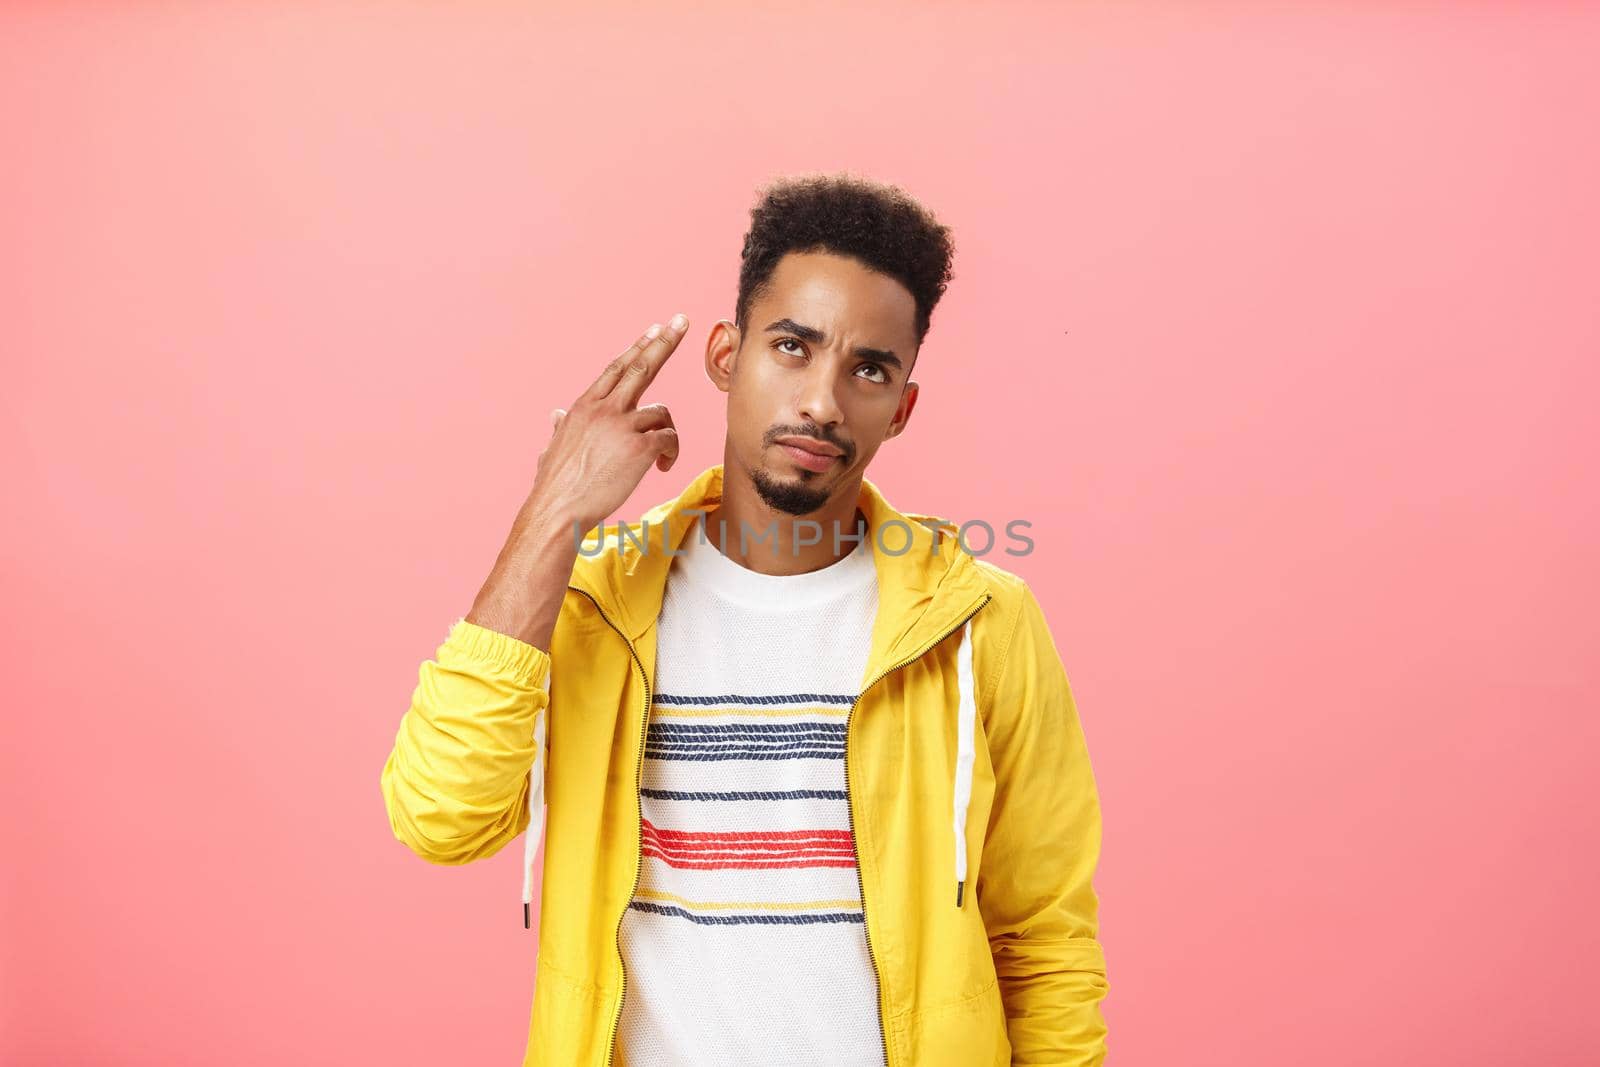 You kill my vibe. Gloomy irritated and annoyed handsome stylish african american guy in yellow trendy jacket showing finger gun gesture over temple as if shooting himself with bothered look.